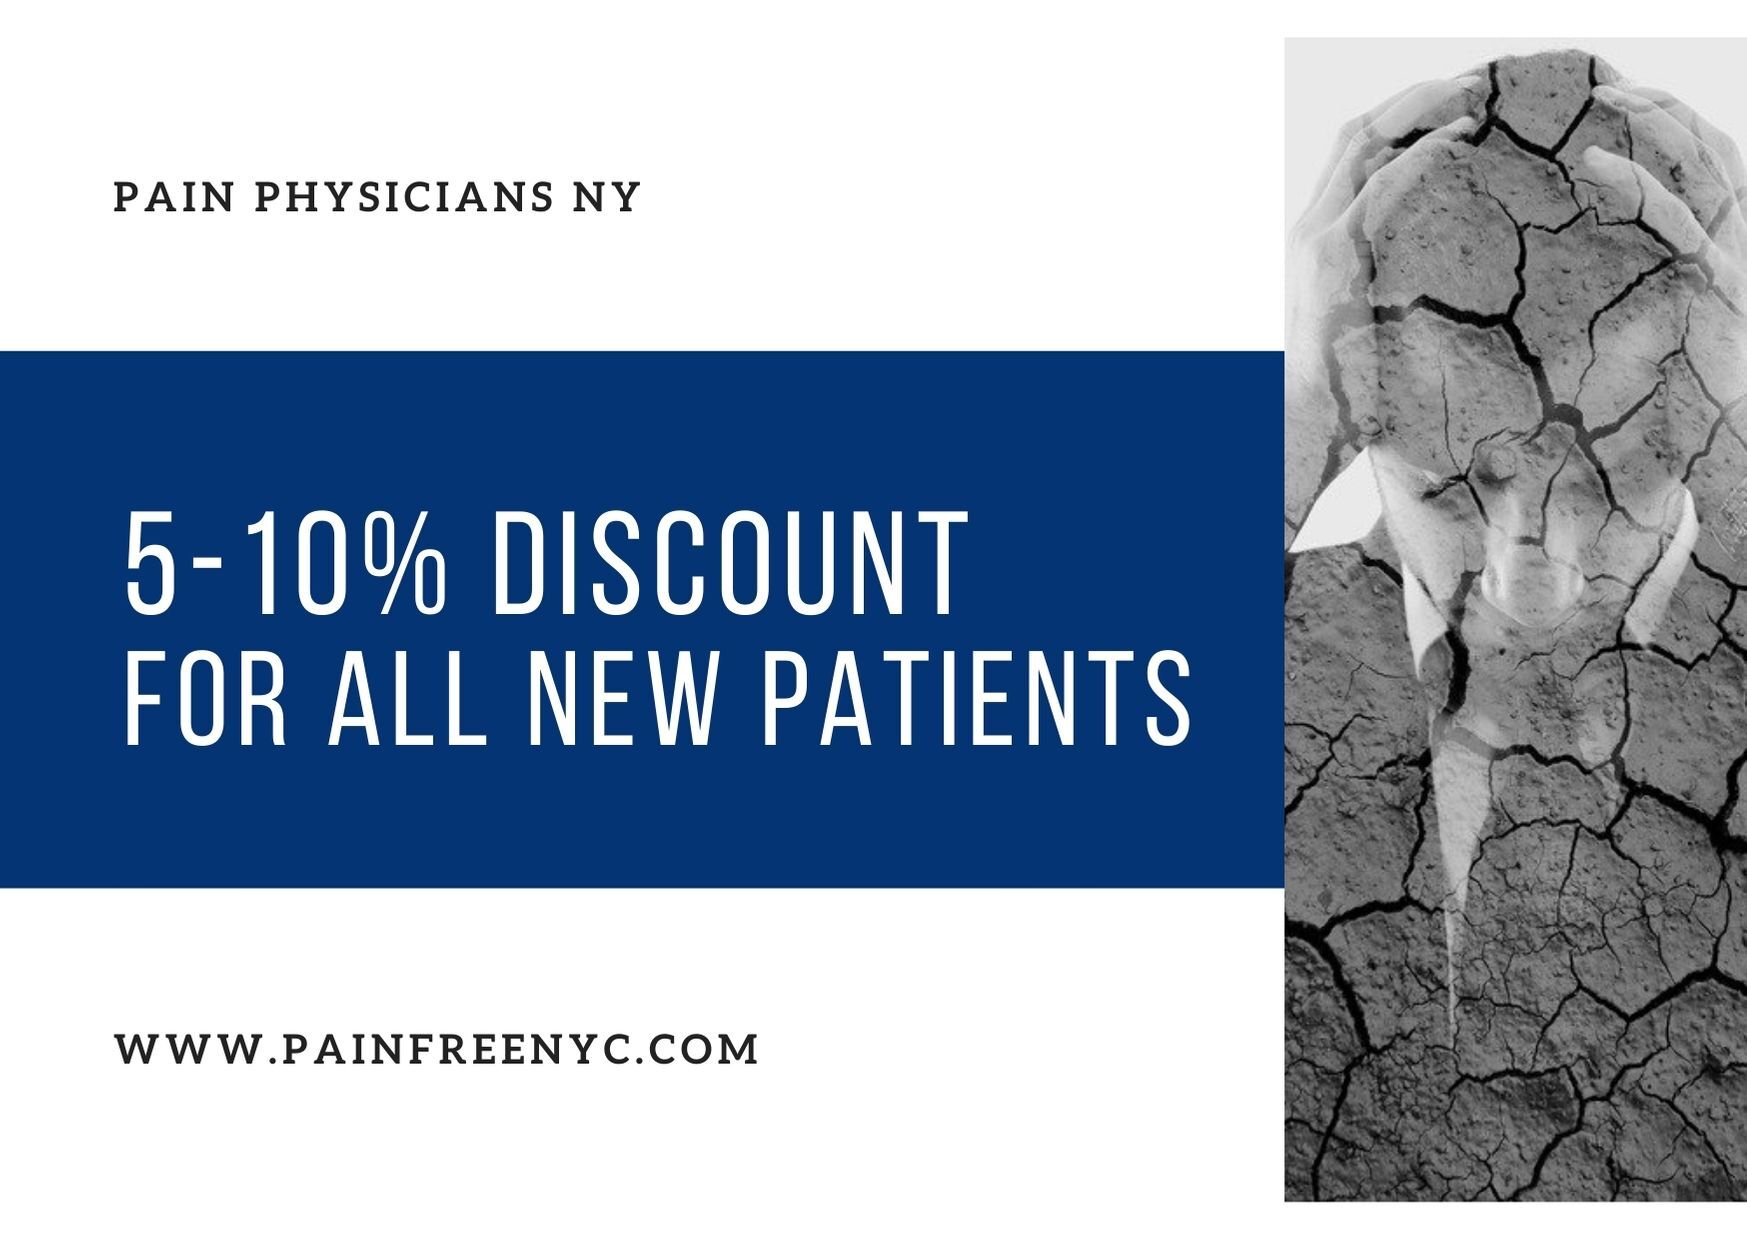 Pain Physicians NY offers a discount